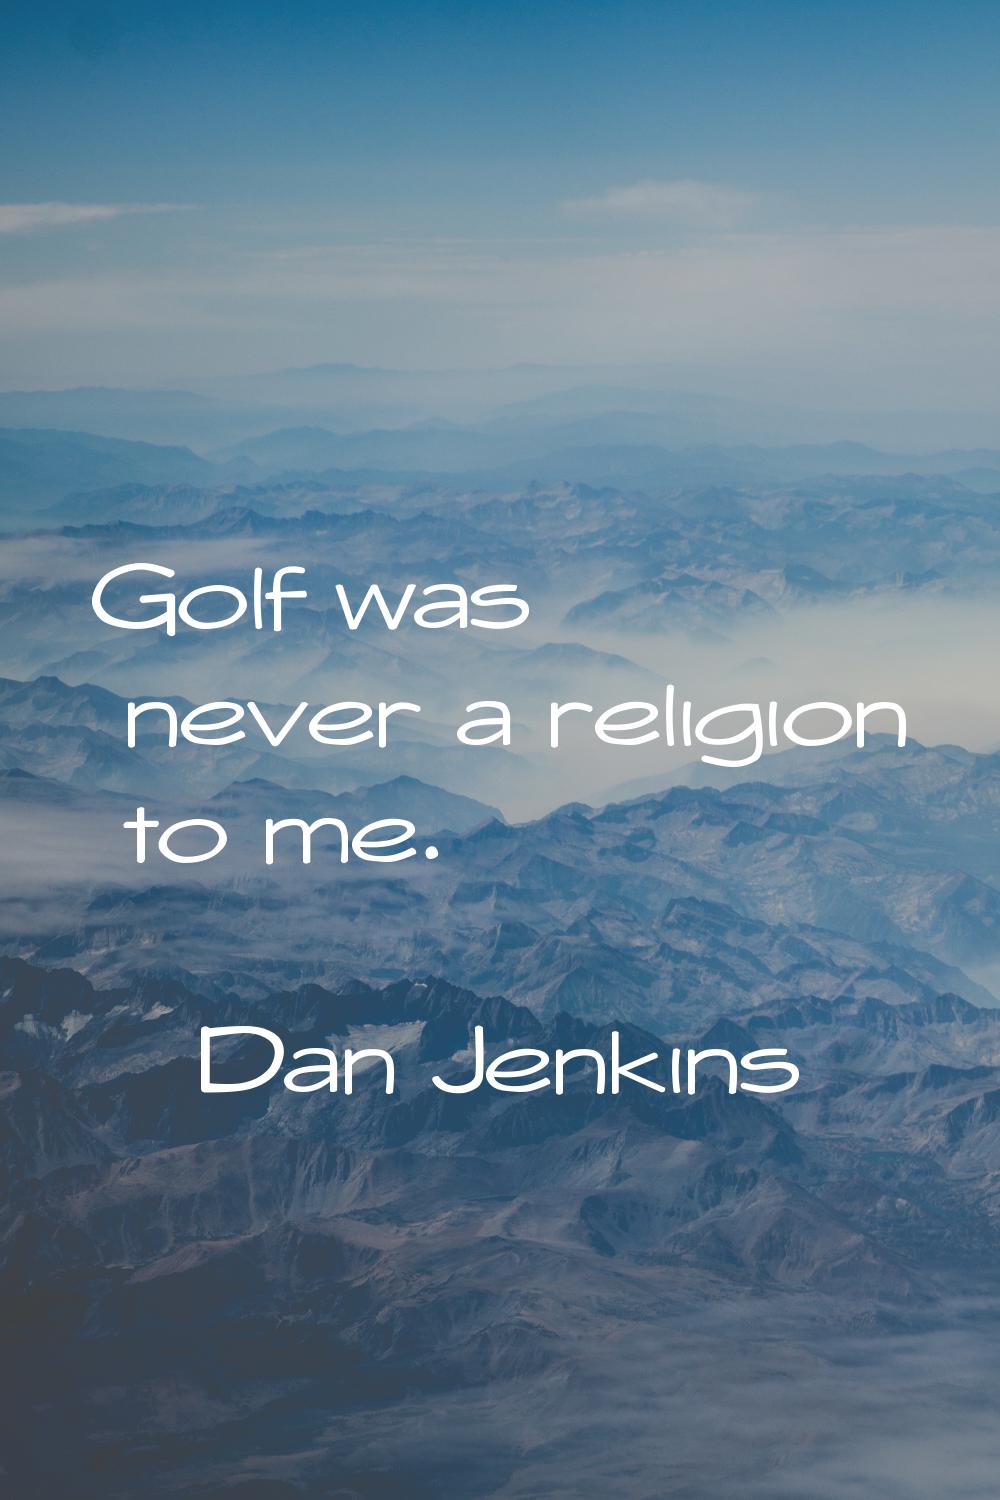 Golf was never a religion to me.